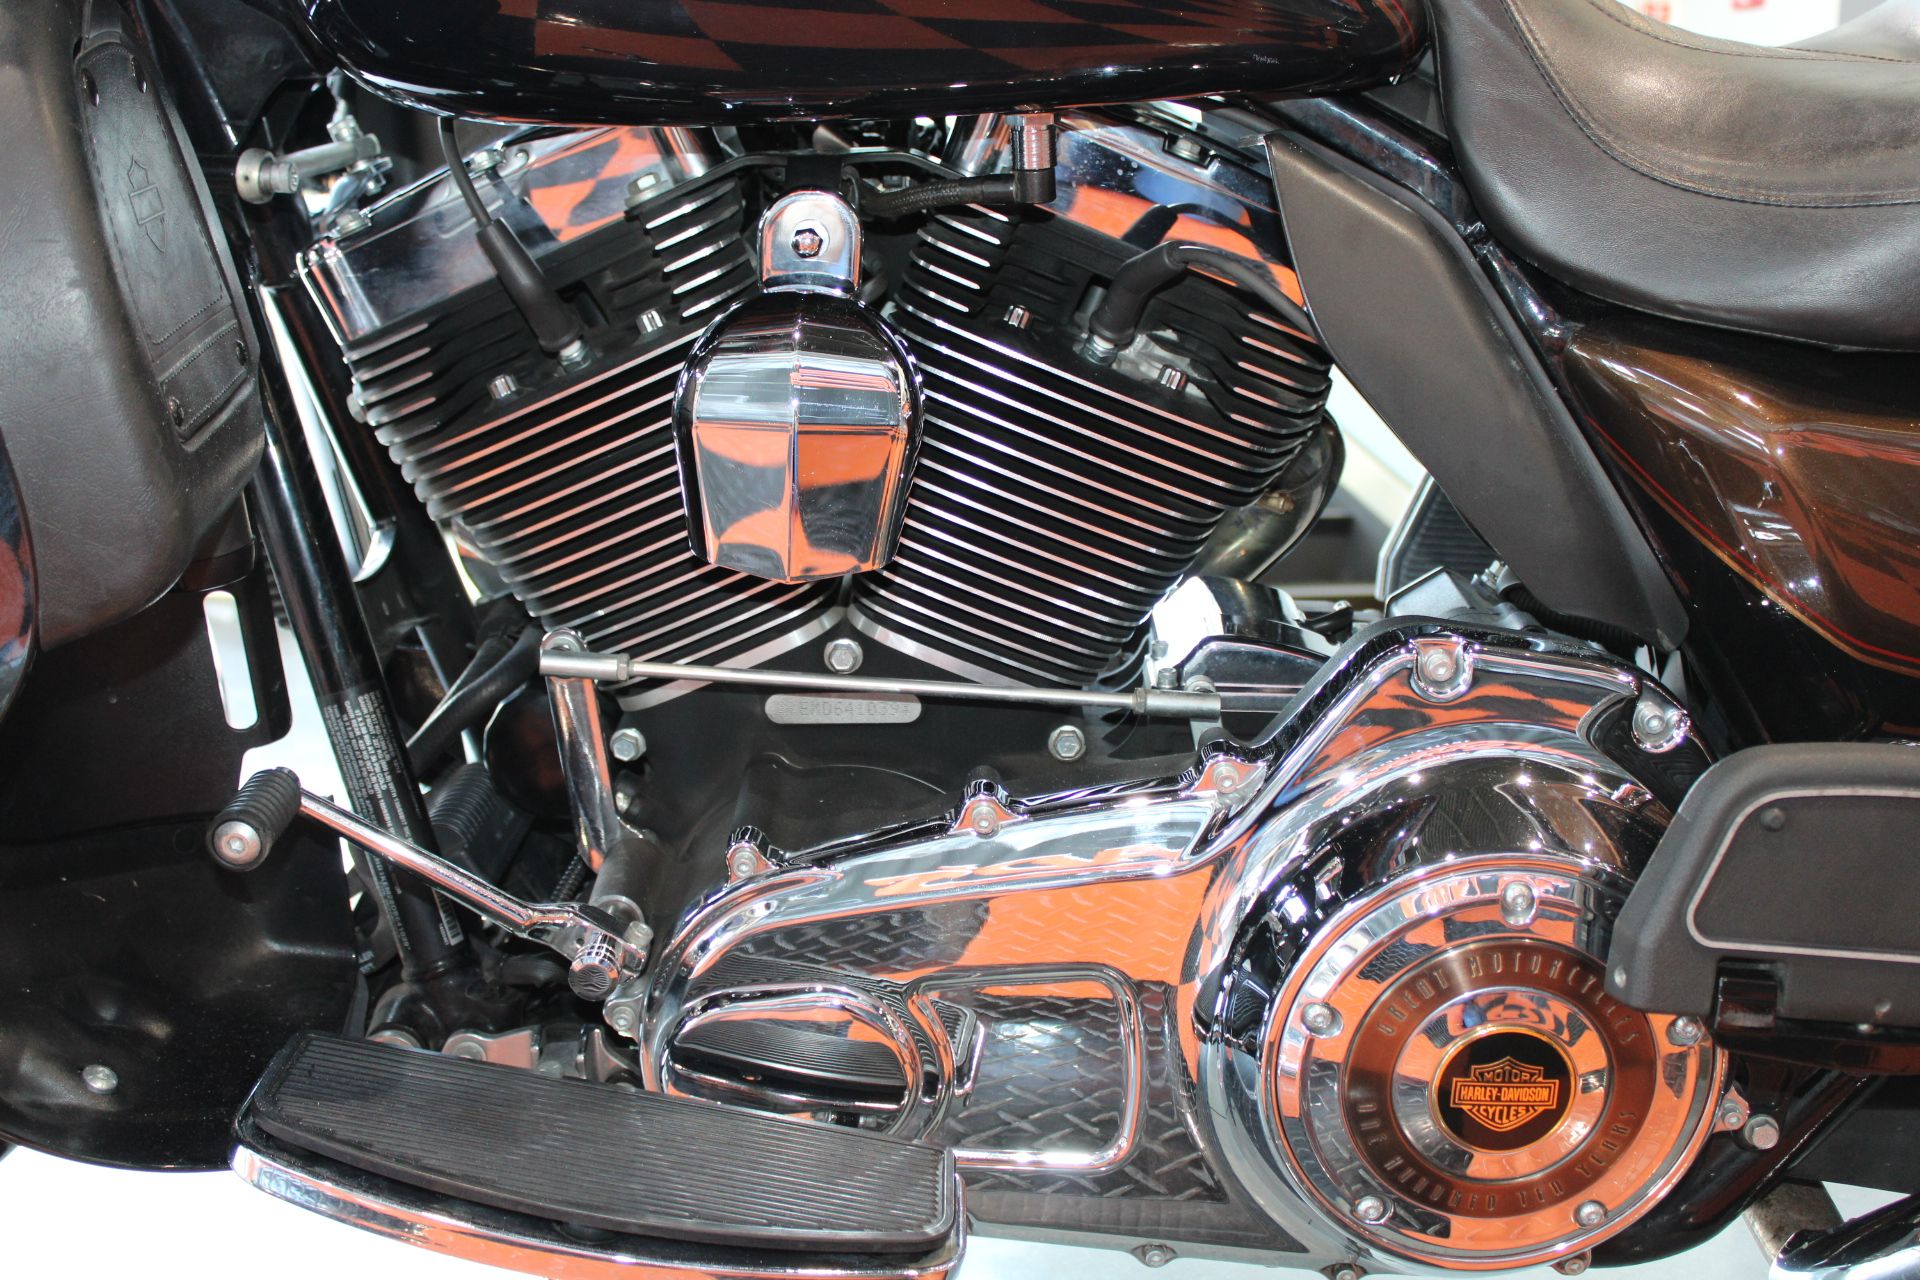 2013 Harley-Davidson Electra Glide® Ultra Limited 110th Anniversary Edition in Shorewood, Illinois - Photo 24